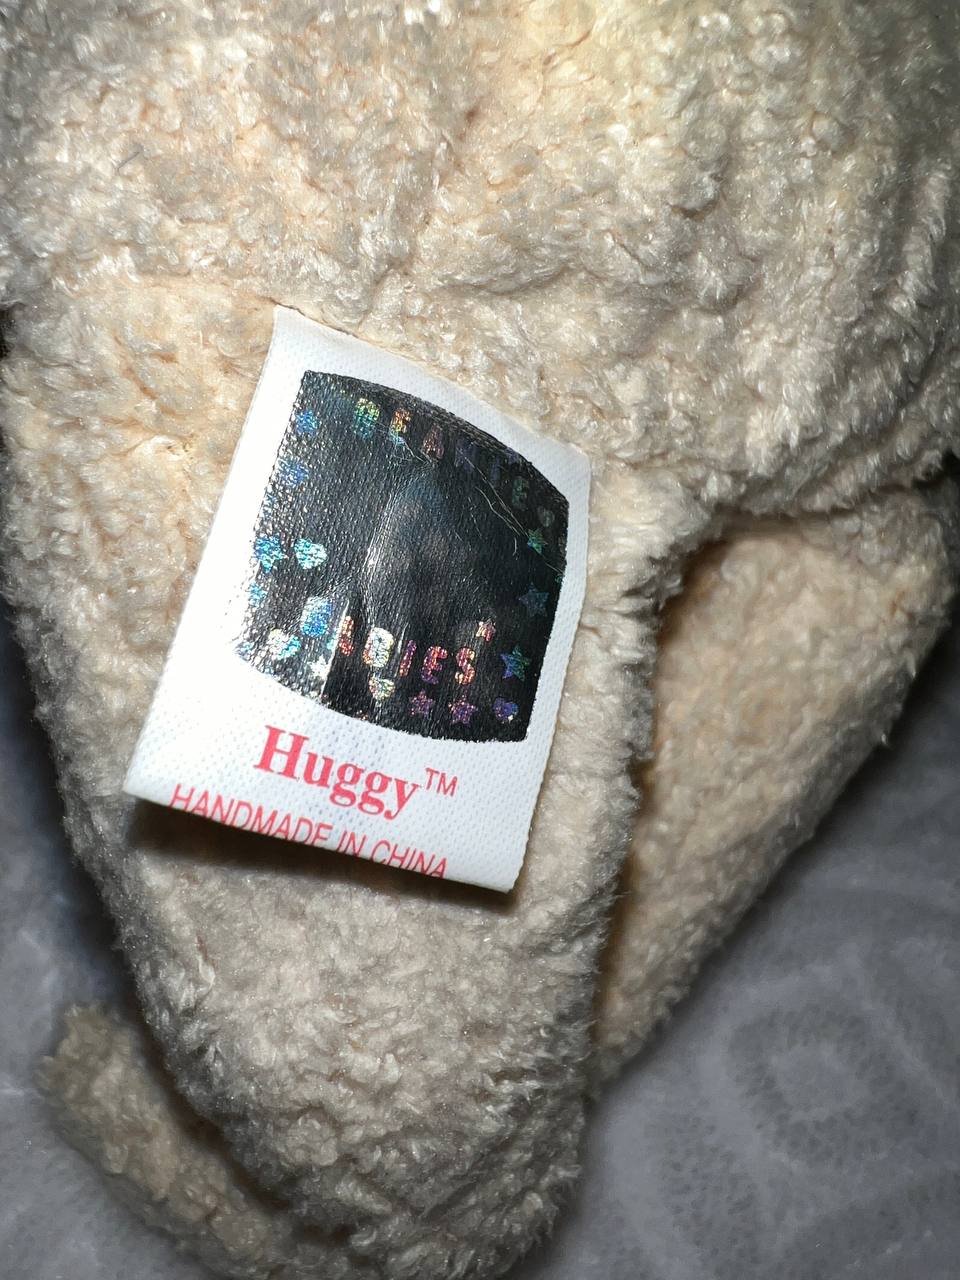 *RARE* MINT Huggy Beanie Baby 2000 With Tag